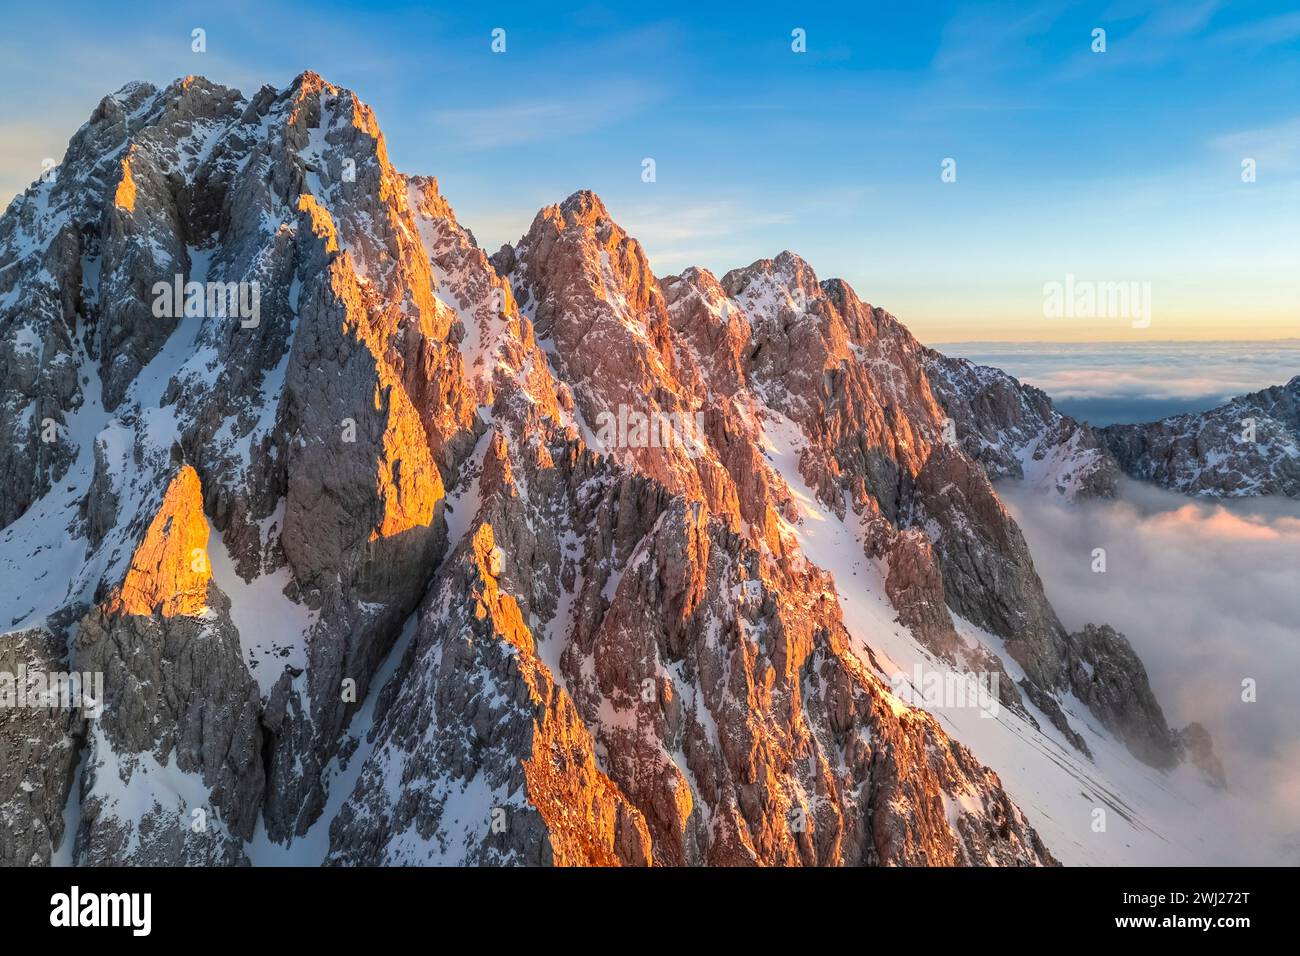 Aerial view of the Pizzo Camino mount at sunset in winter. Schilpario, Val di Scalve, bergamo district, Lombardy, Italy. Stock Photo